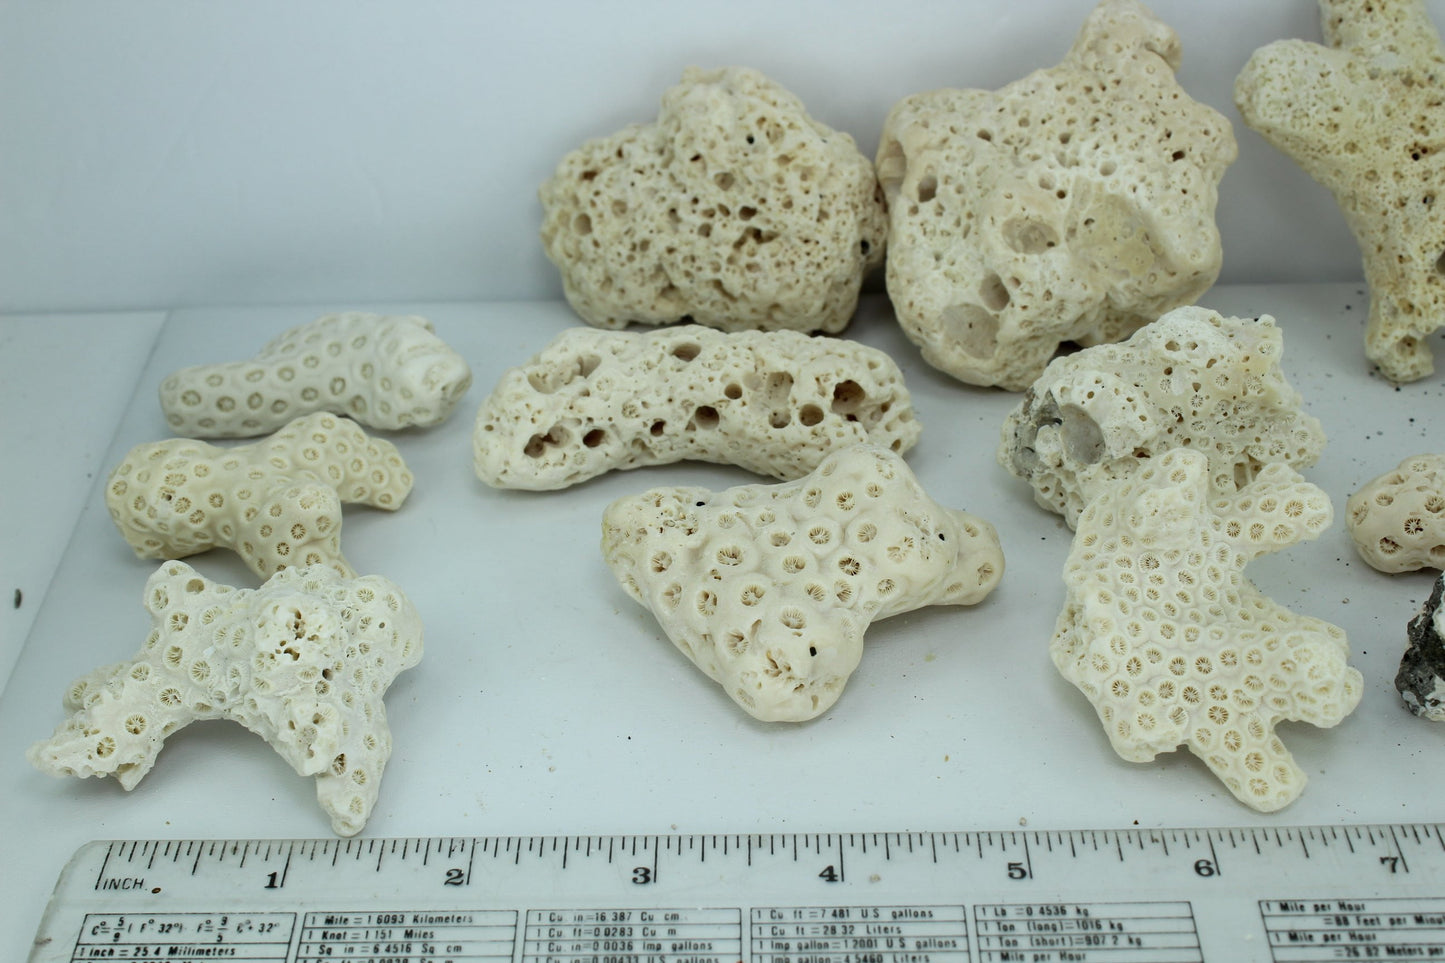 Natural Coral Fossils 16 Small Pieces 3 1/2" to 32 Vintage Estate Collection Aquarium Shell Art Collectibles unusual